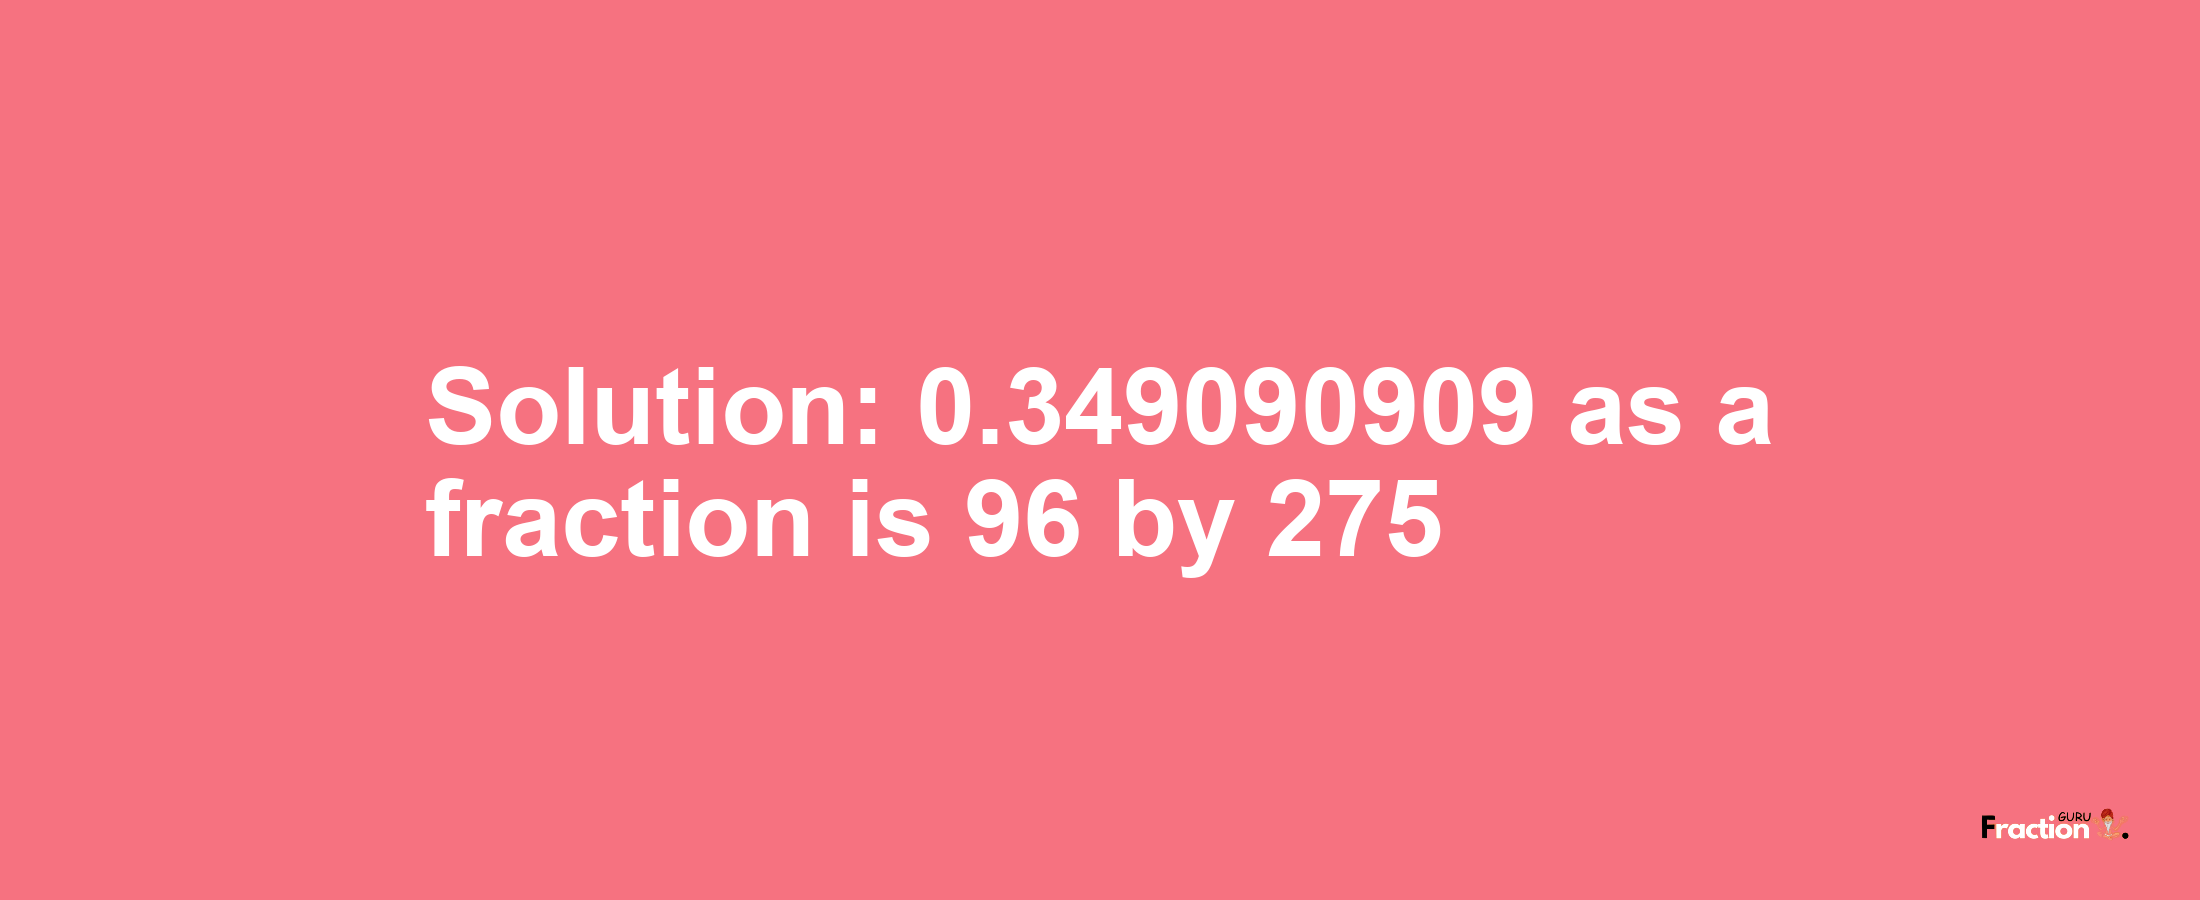 Solution:0.349090909 as a fraction is 96/275